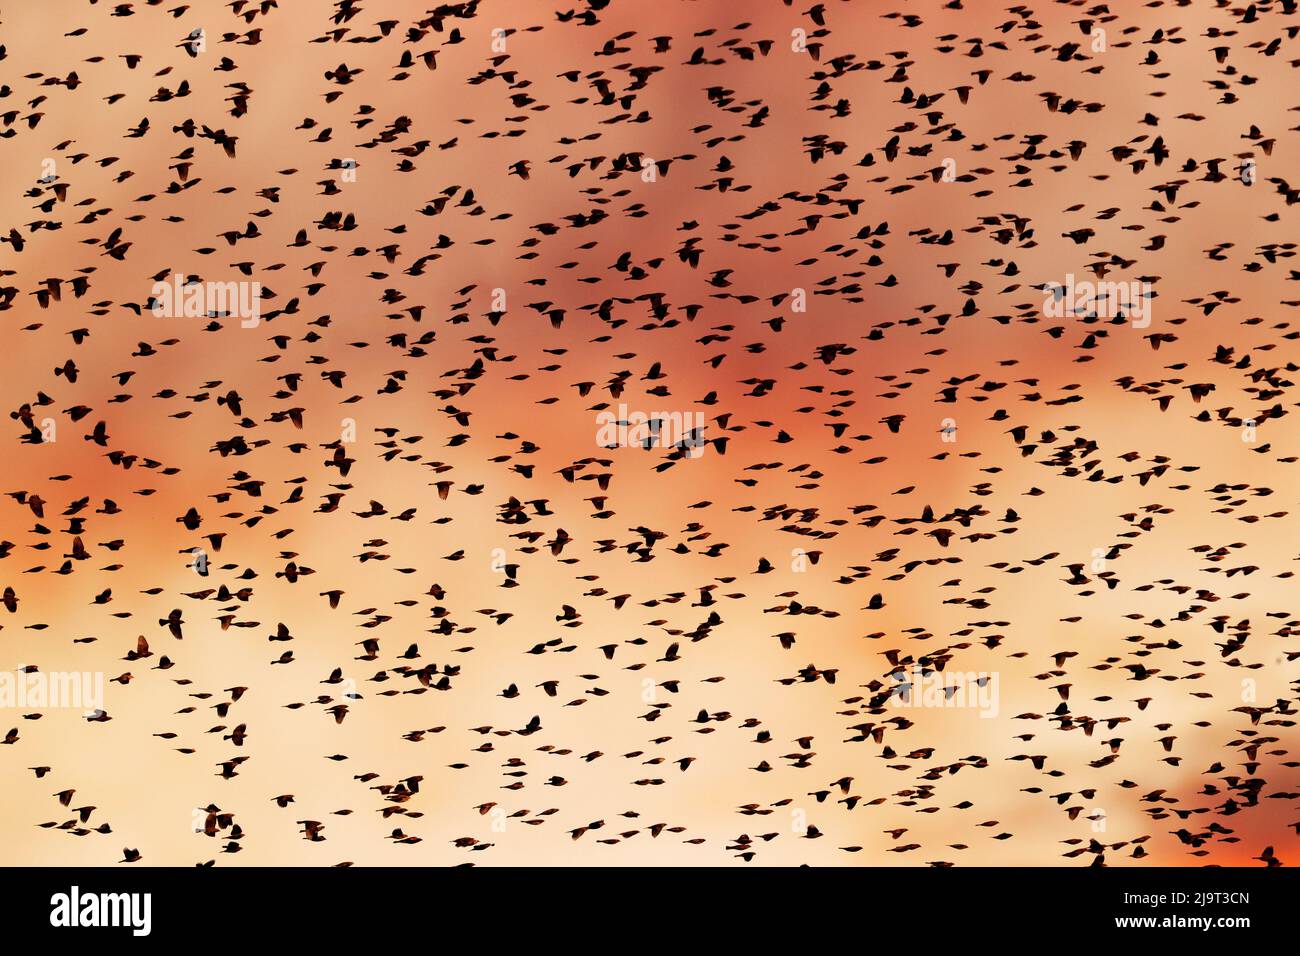 Large murmuration of female and juvenile red-winged blackbirds silhouetted. Bosque del Apache National Wildlife Refuge, New Mexico Stock Photo